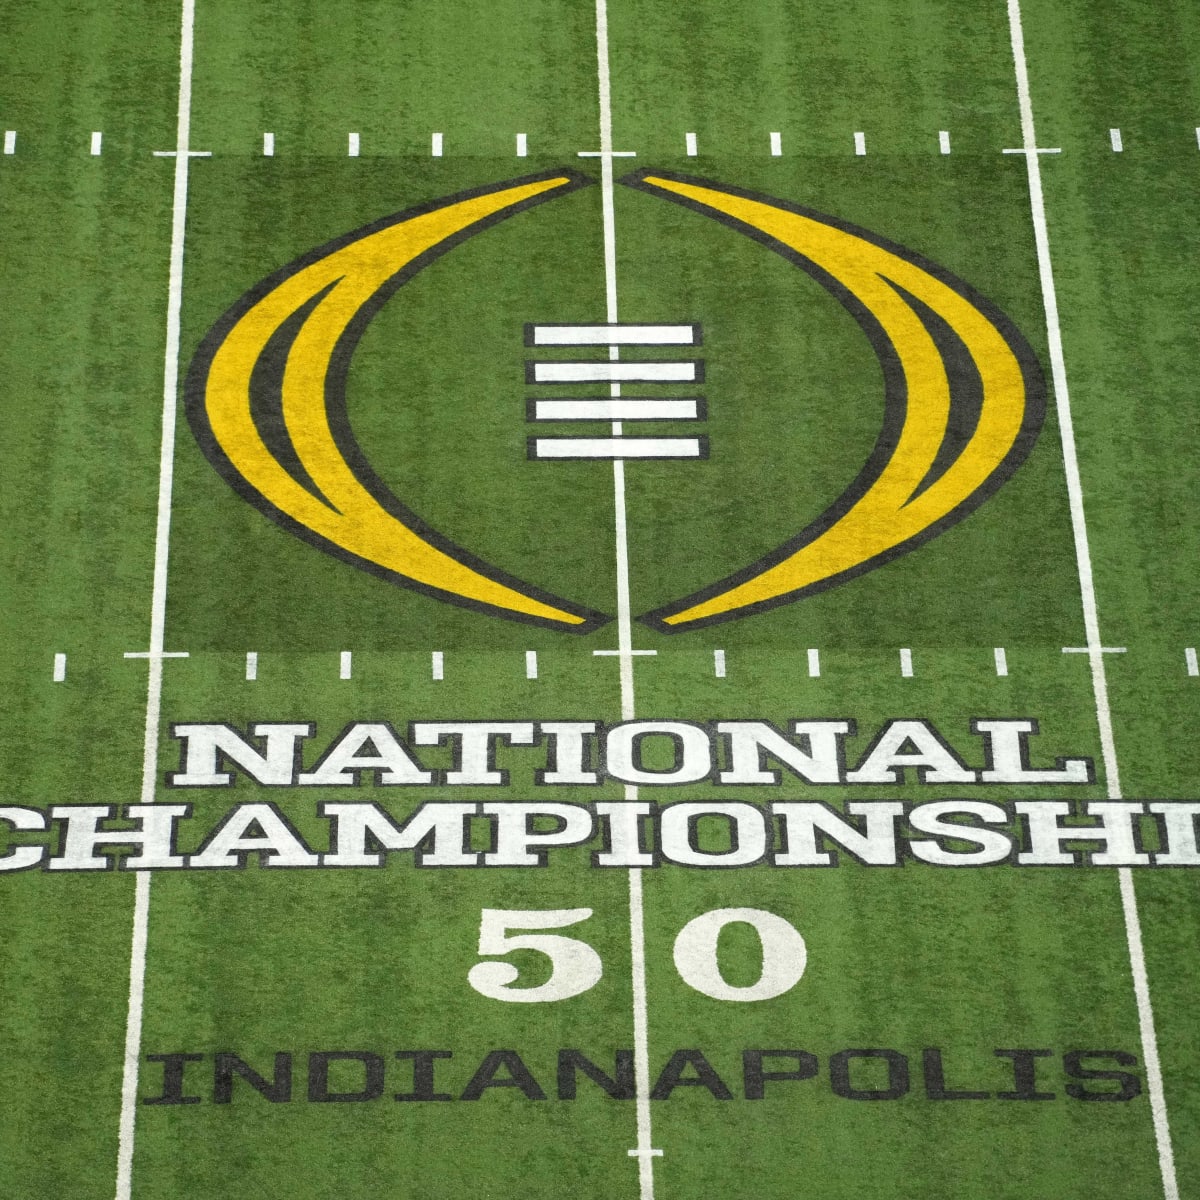 PHOTOS: College Football Playoffs National Championship in Indianapolis